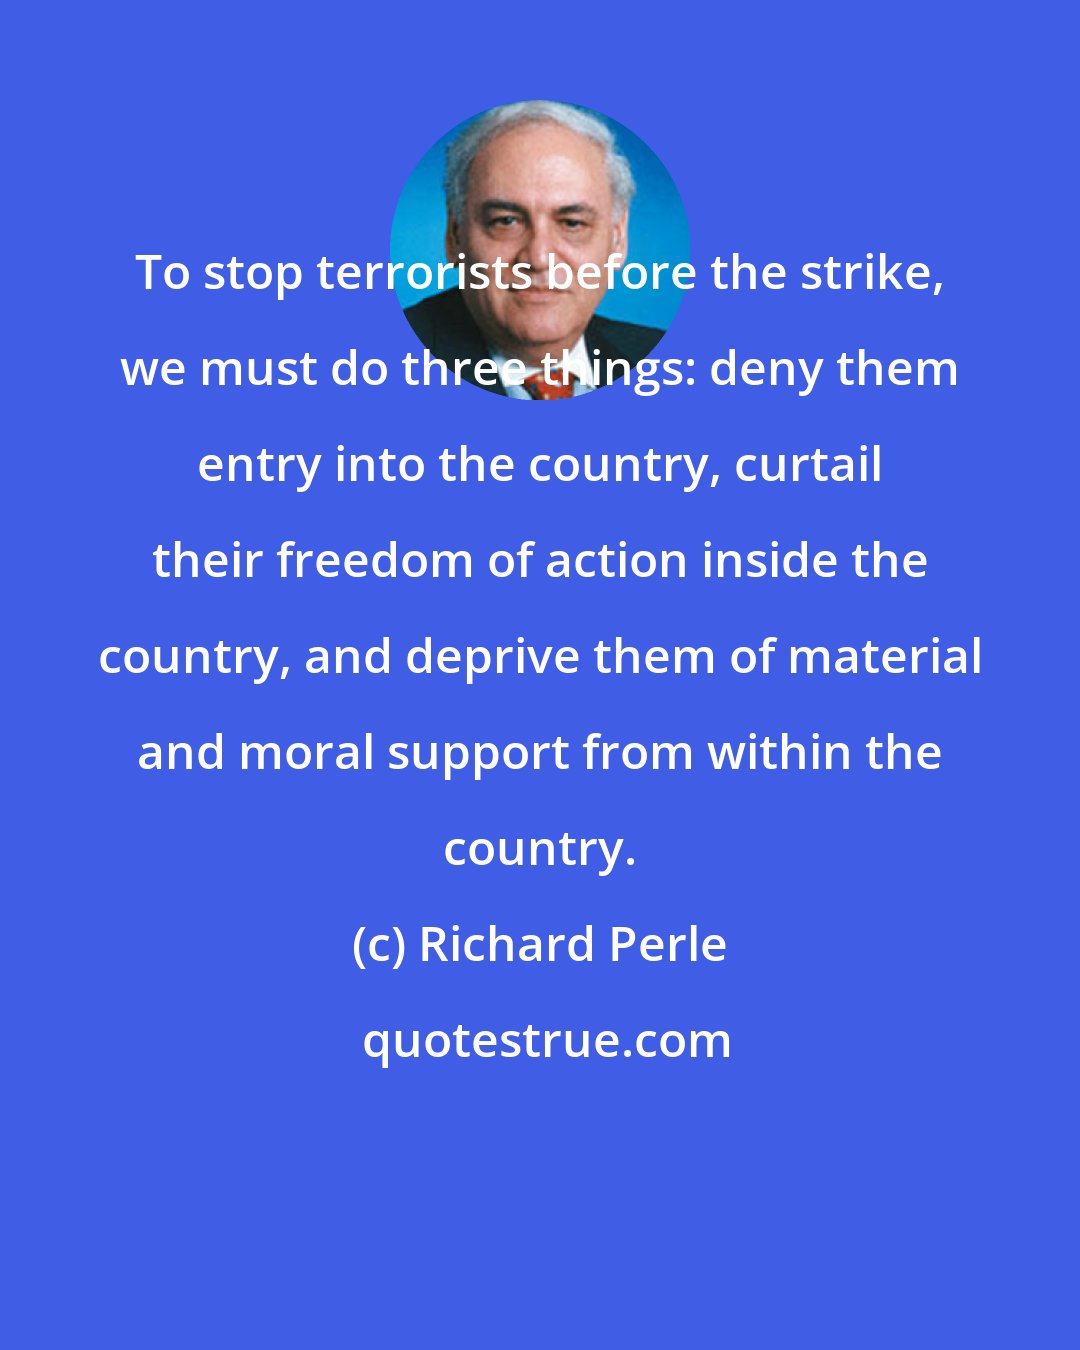 Richard Perle: To stop terrorists before the strike, we must do three things: deny them entry into the country, curtail their freedom of action inside the country, and deprive them of material and moral support from within the country.